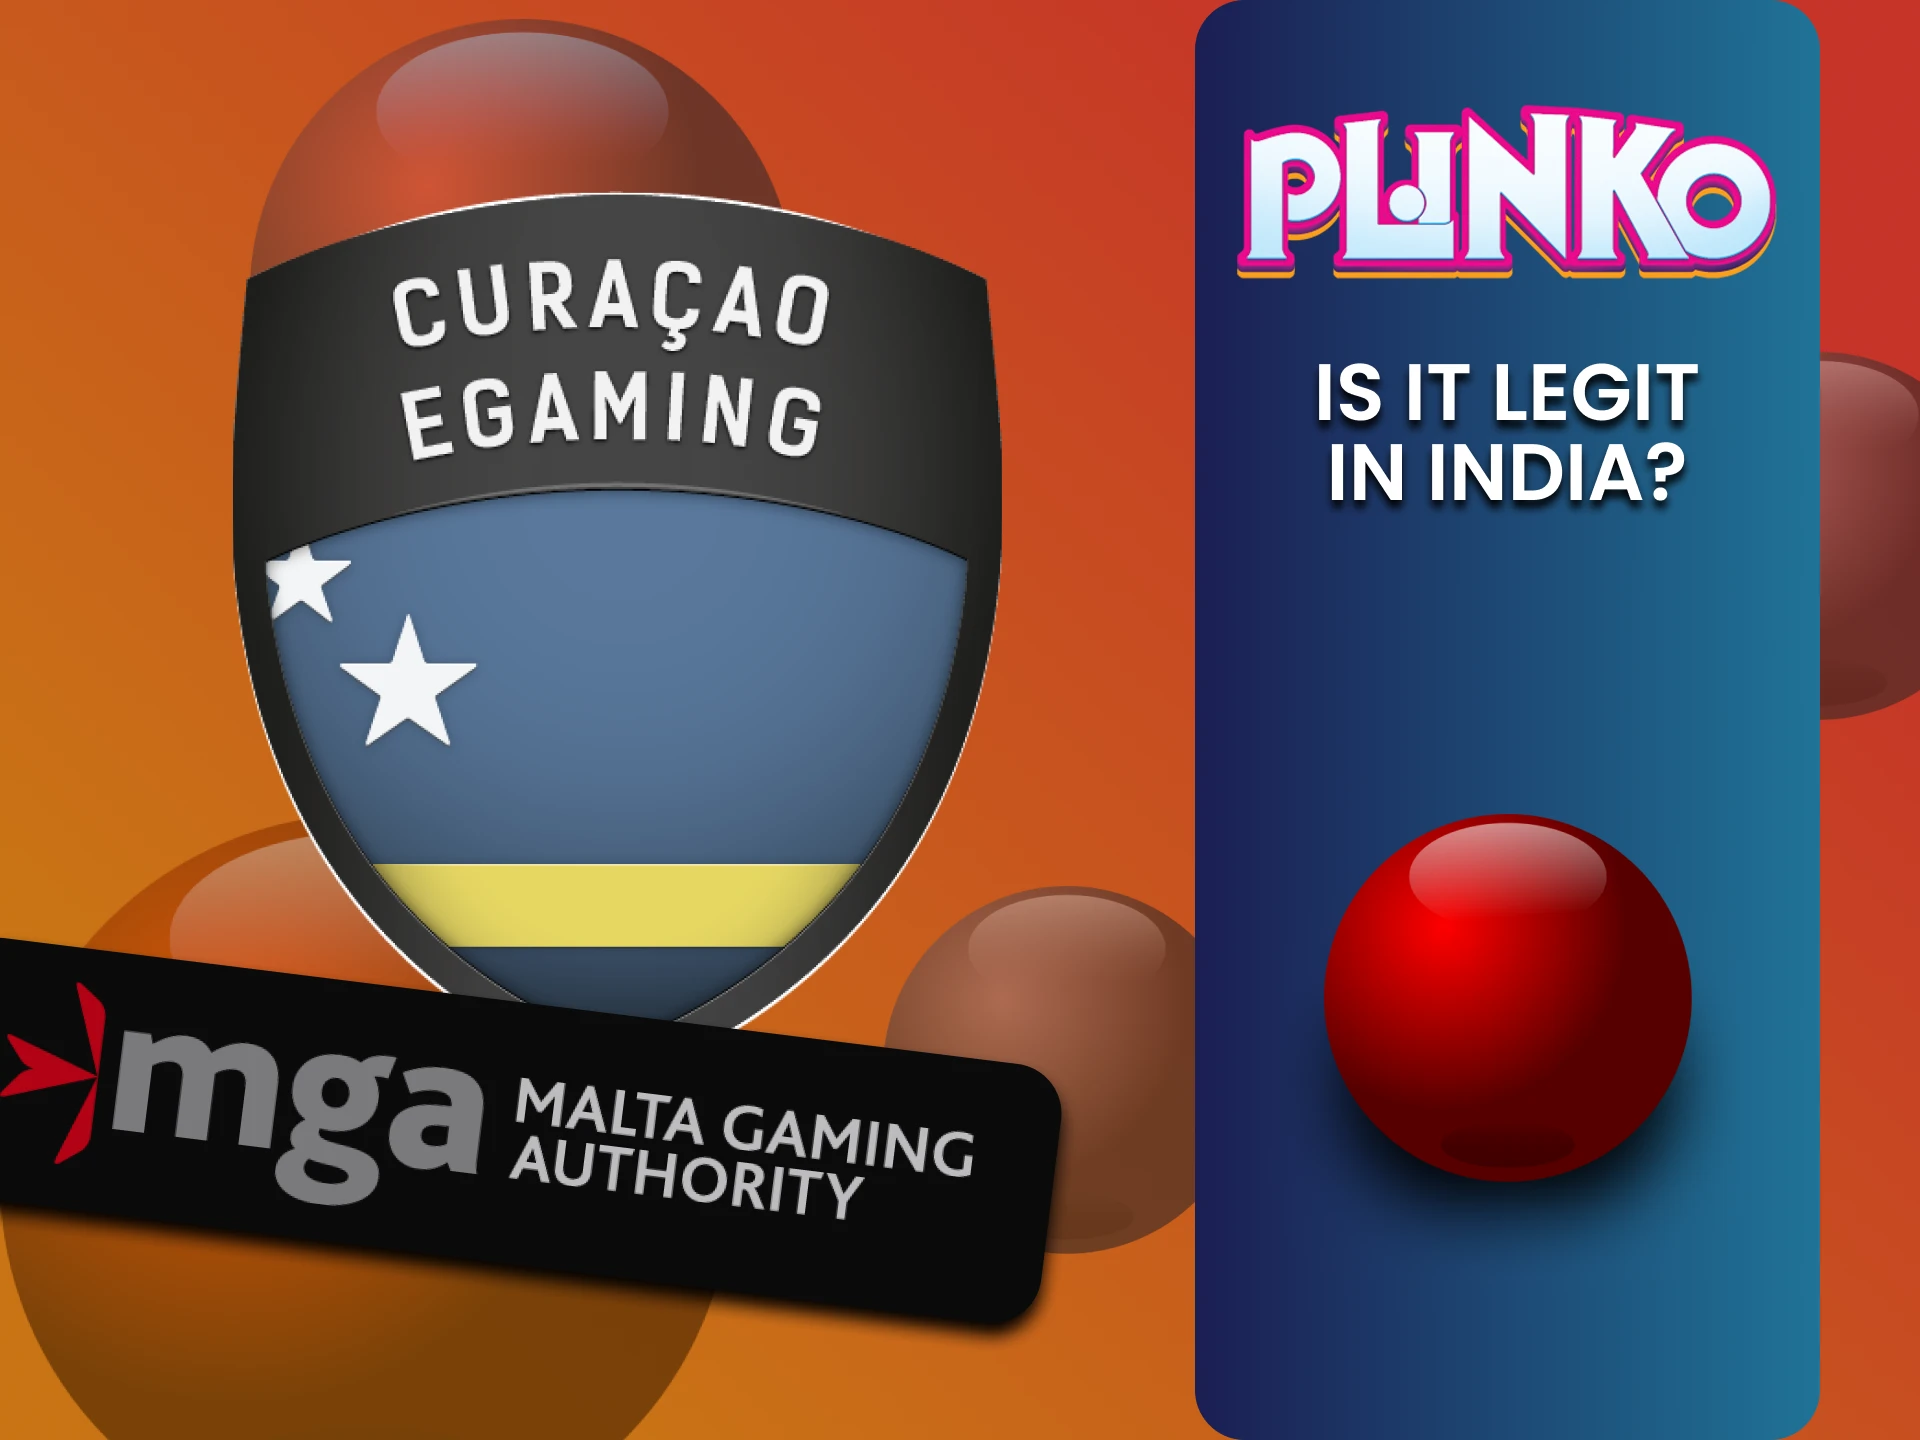 In India, Plinko is a legal game.